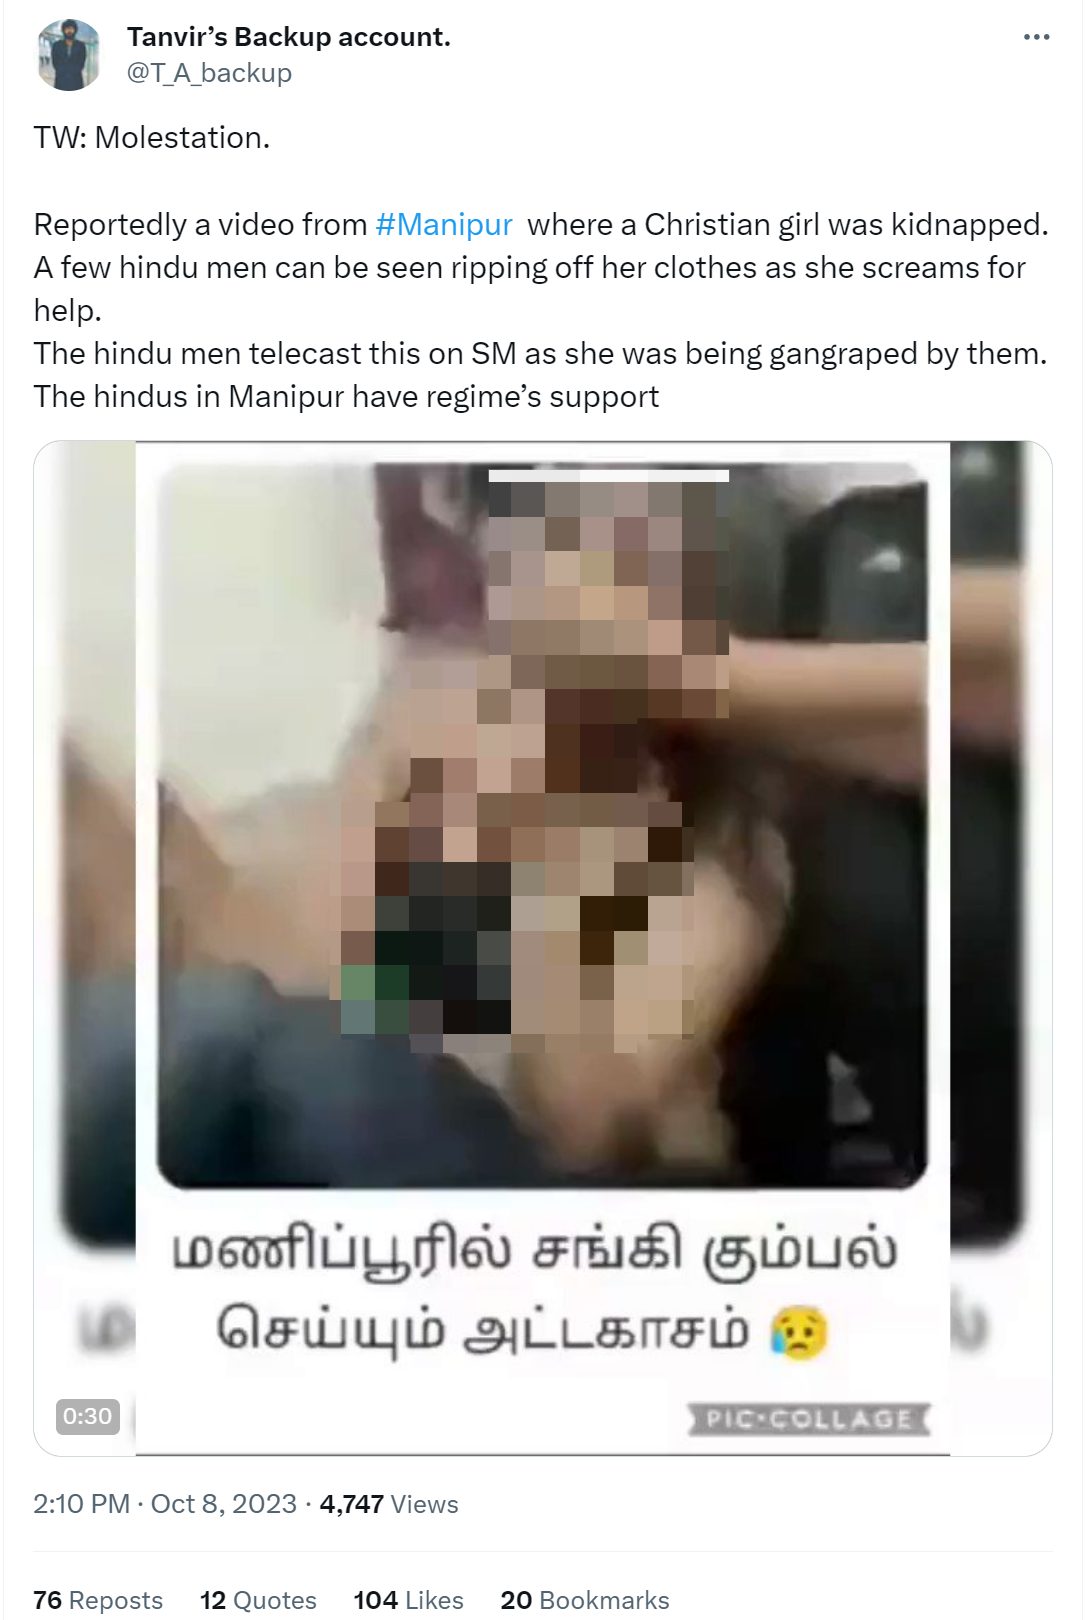 Manipuri Sex Vedeos - Old video of sexual assault case in Bengaluru involving Bangladeshis viral  as recent incident in Manipur - Alt News